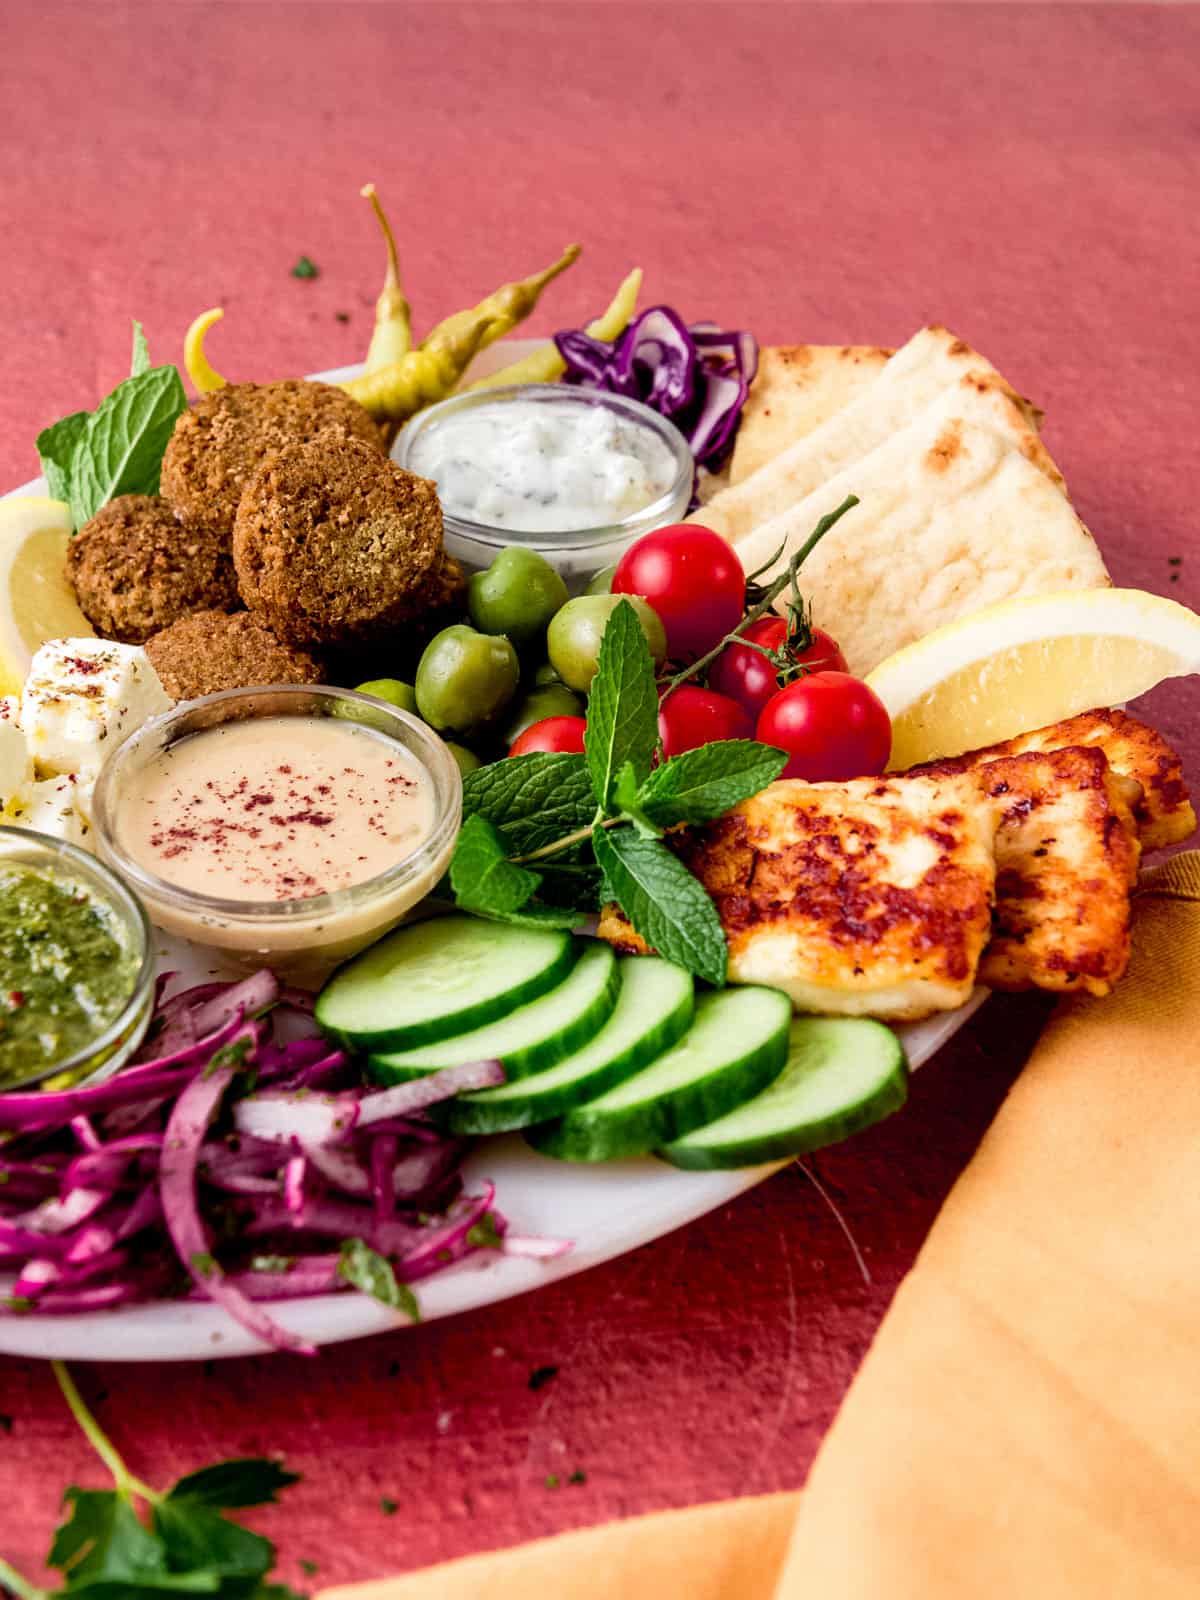 Mediterranean falafel platter with fried halloumi cheese, fresh vegetables, pita bread and tahini sauce.